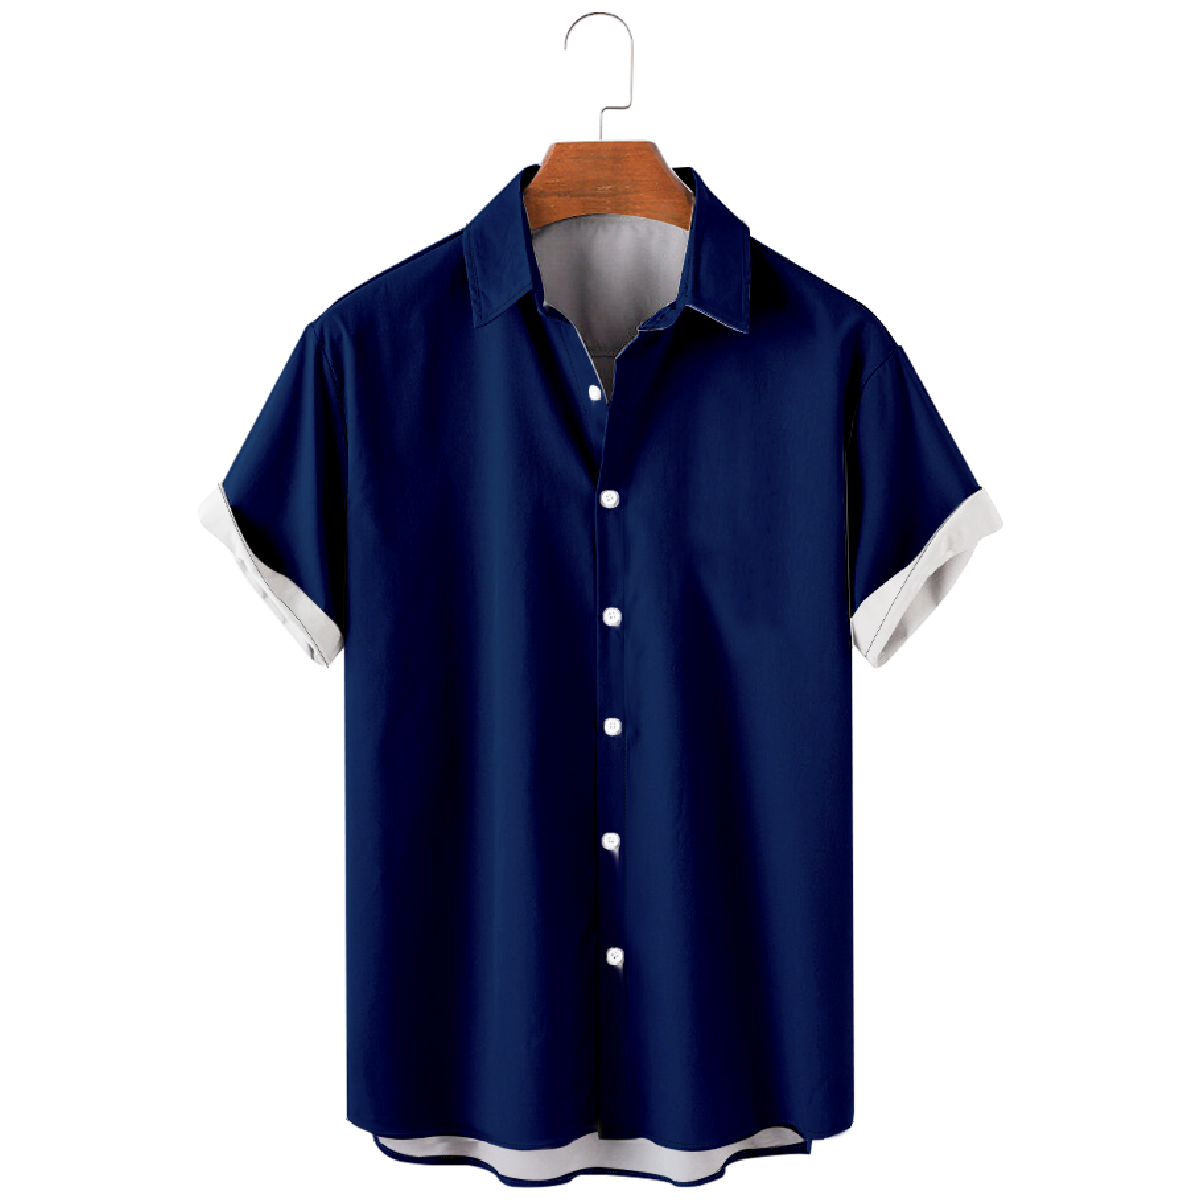 Mens Indianapolis Speed Blue Button Up Shirt Short Sleeve Regular Fit Breathable Shirt